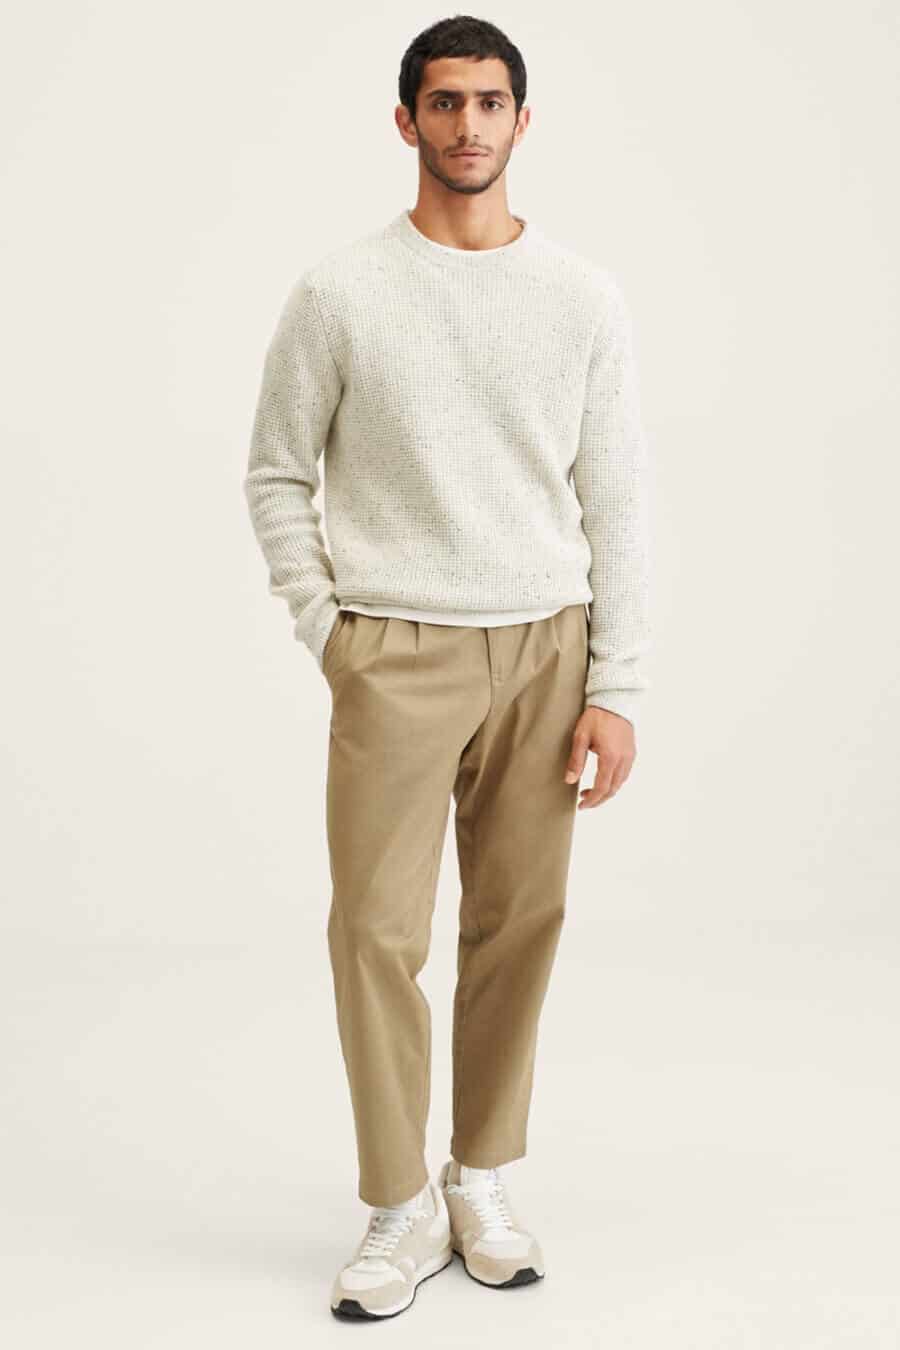 Men's khaki pants outfit with crew neck sweater and tonal sneakers